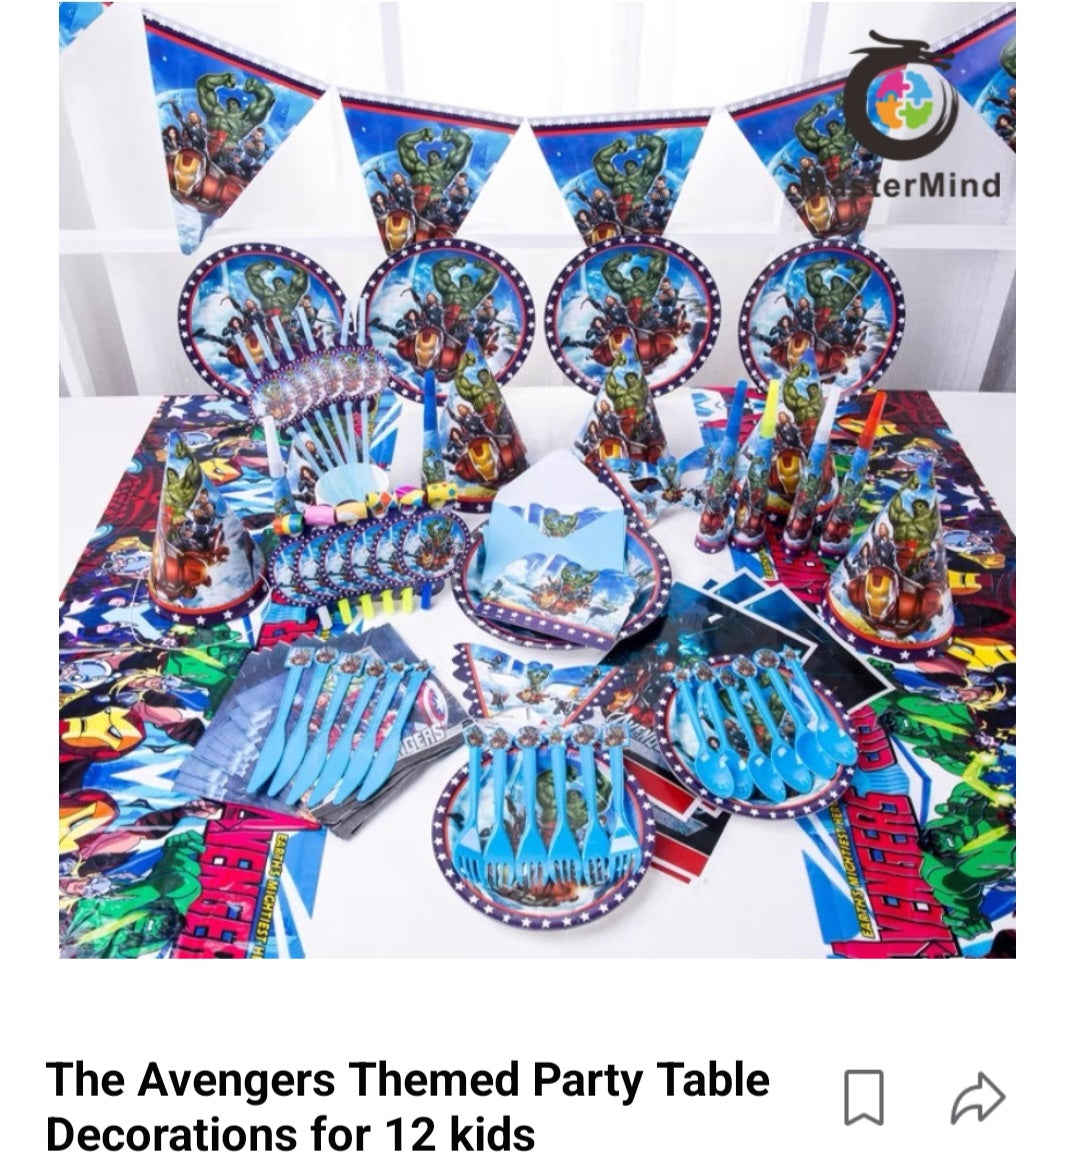 Themed Partyware sets